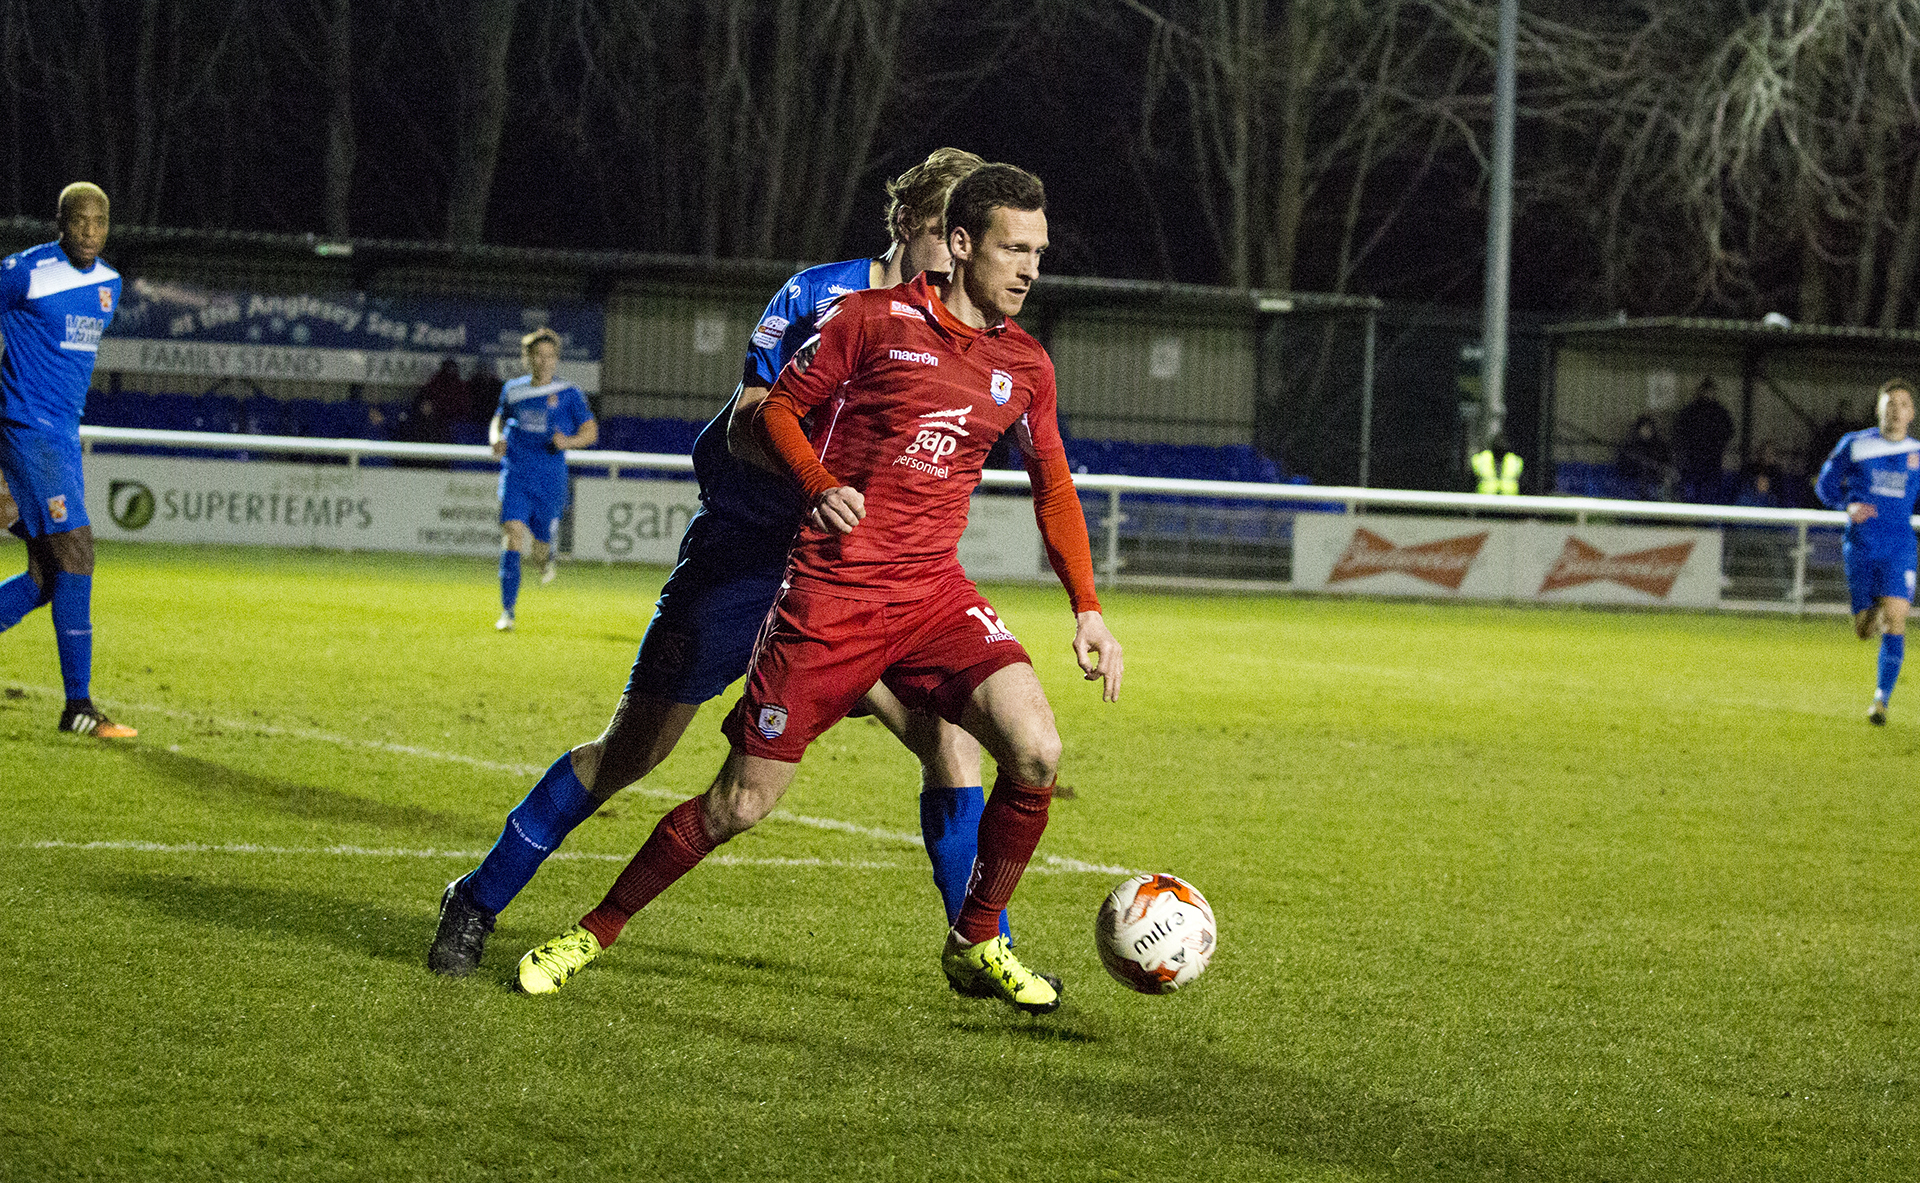 Matty Williams on the attack for The Nomads - © NCM Media